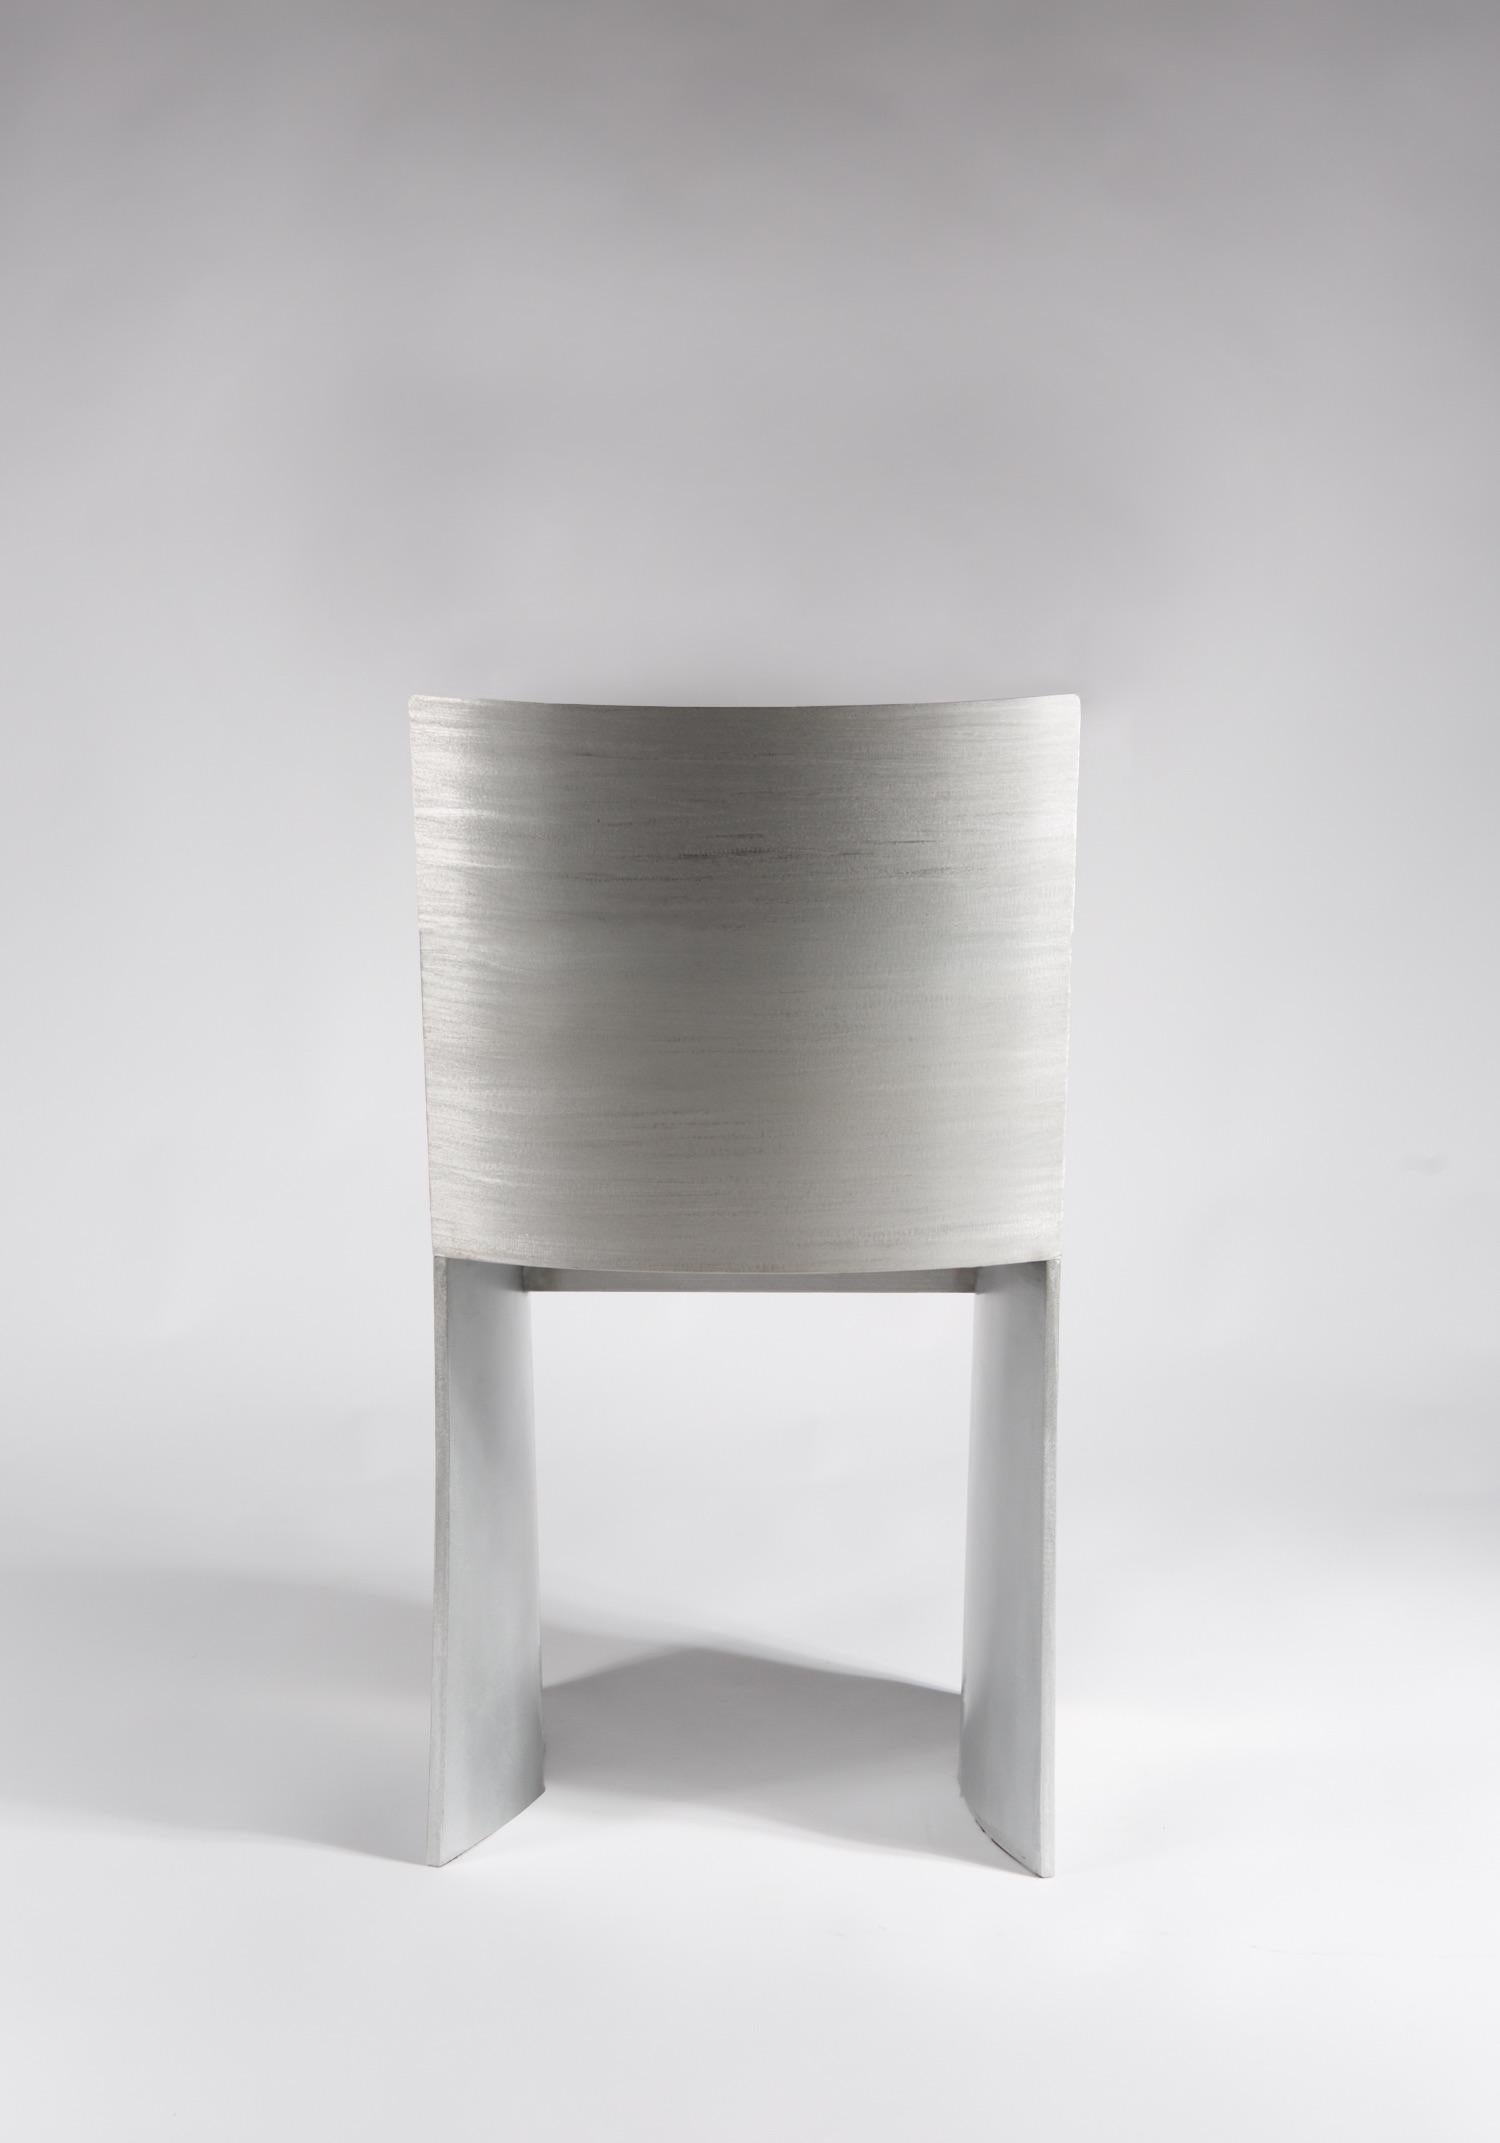 ISU Lowback Handcrafted Textured Satin Metal Chair by Soraya Osorio For Sale 2